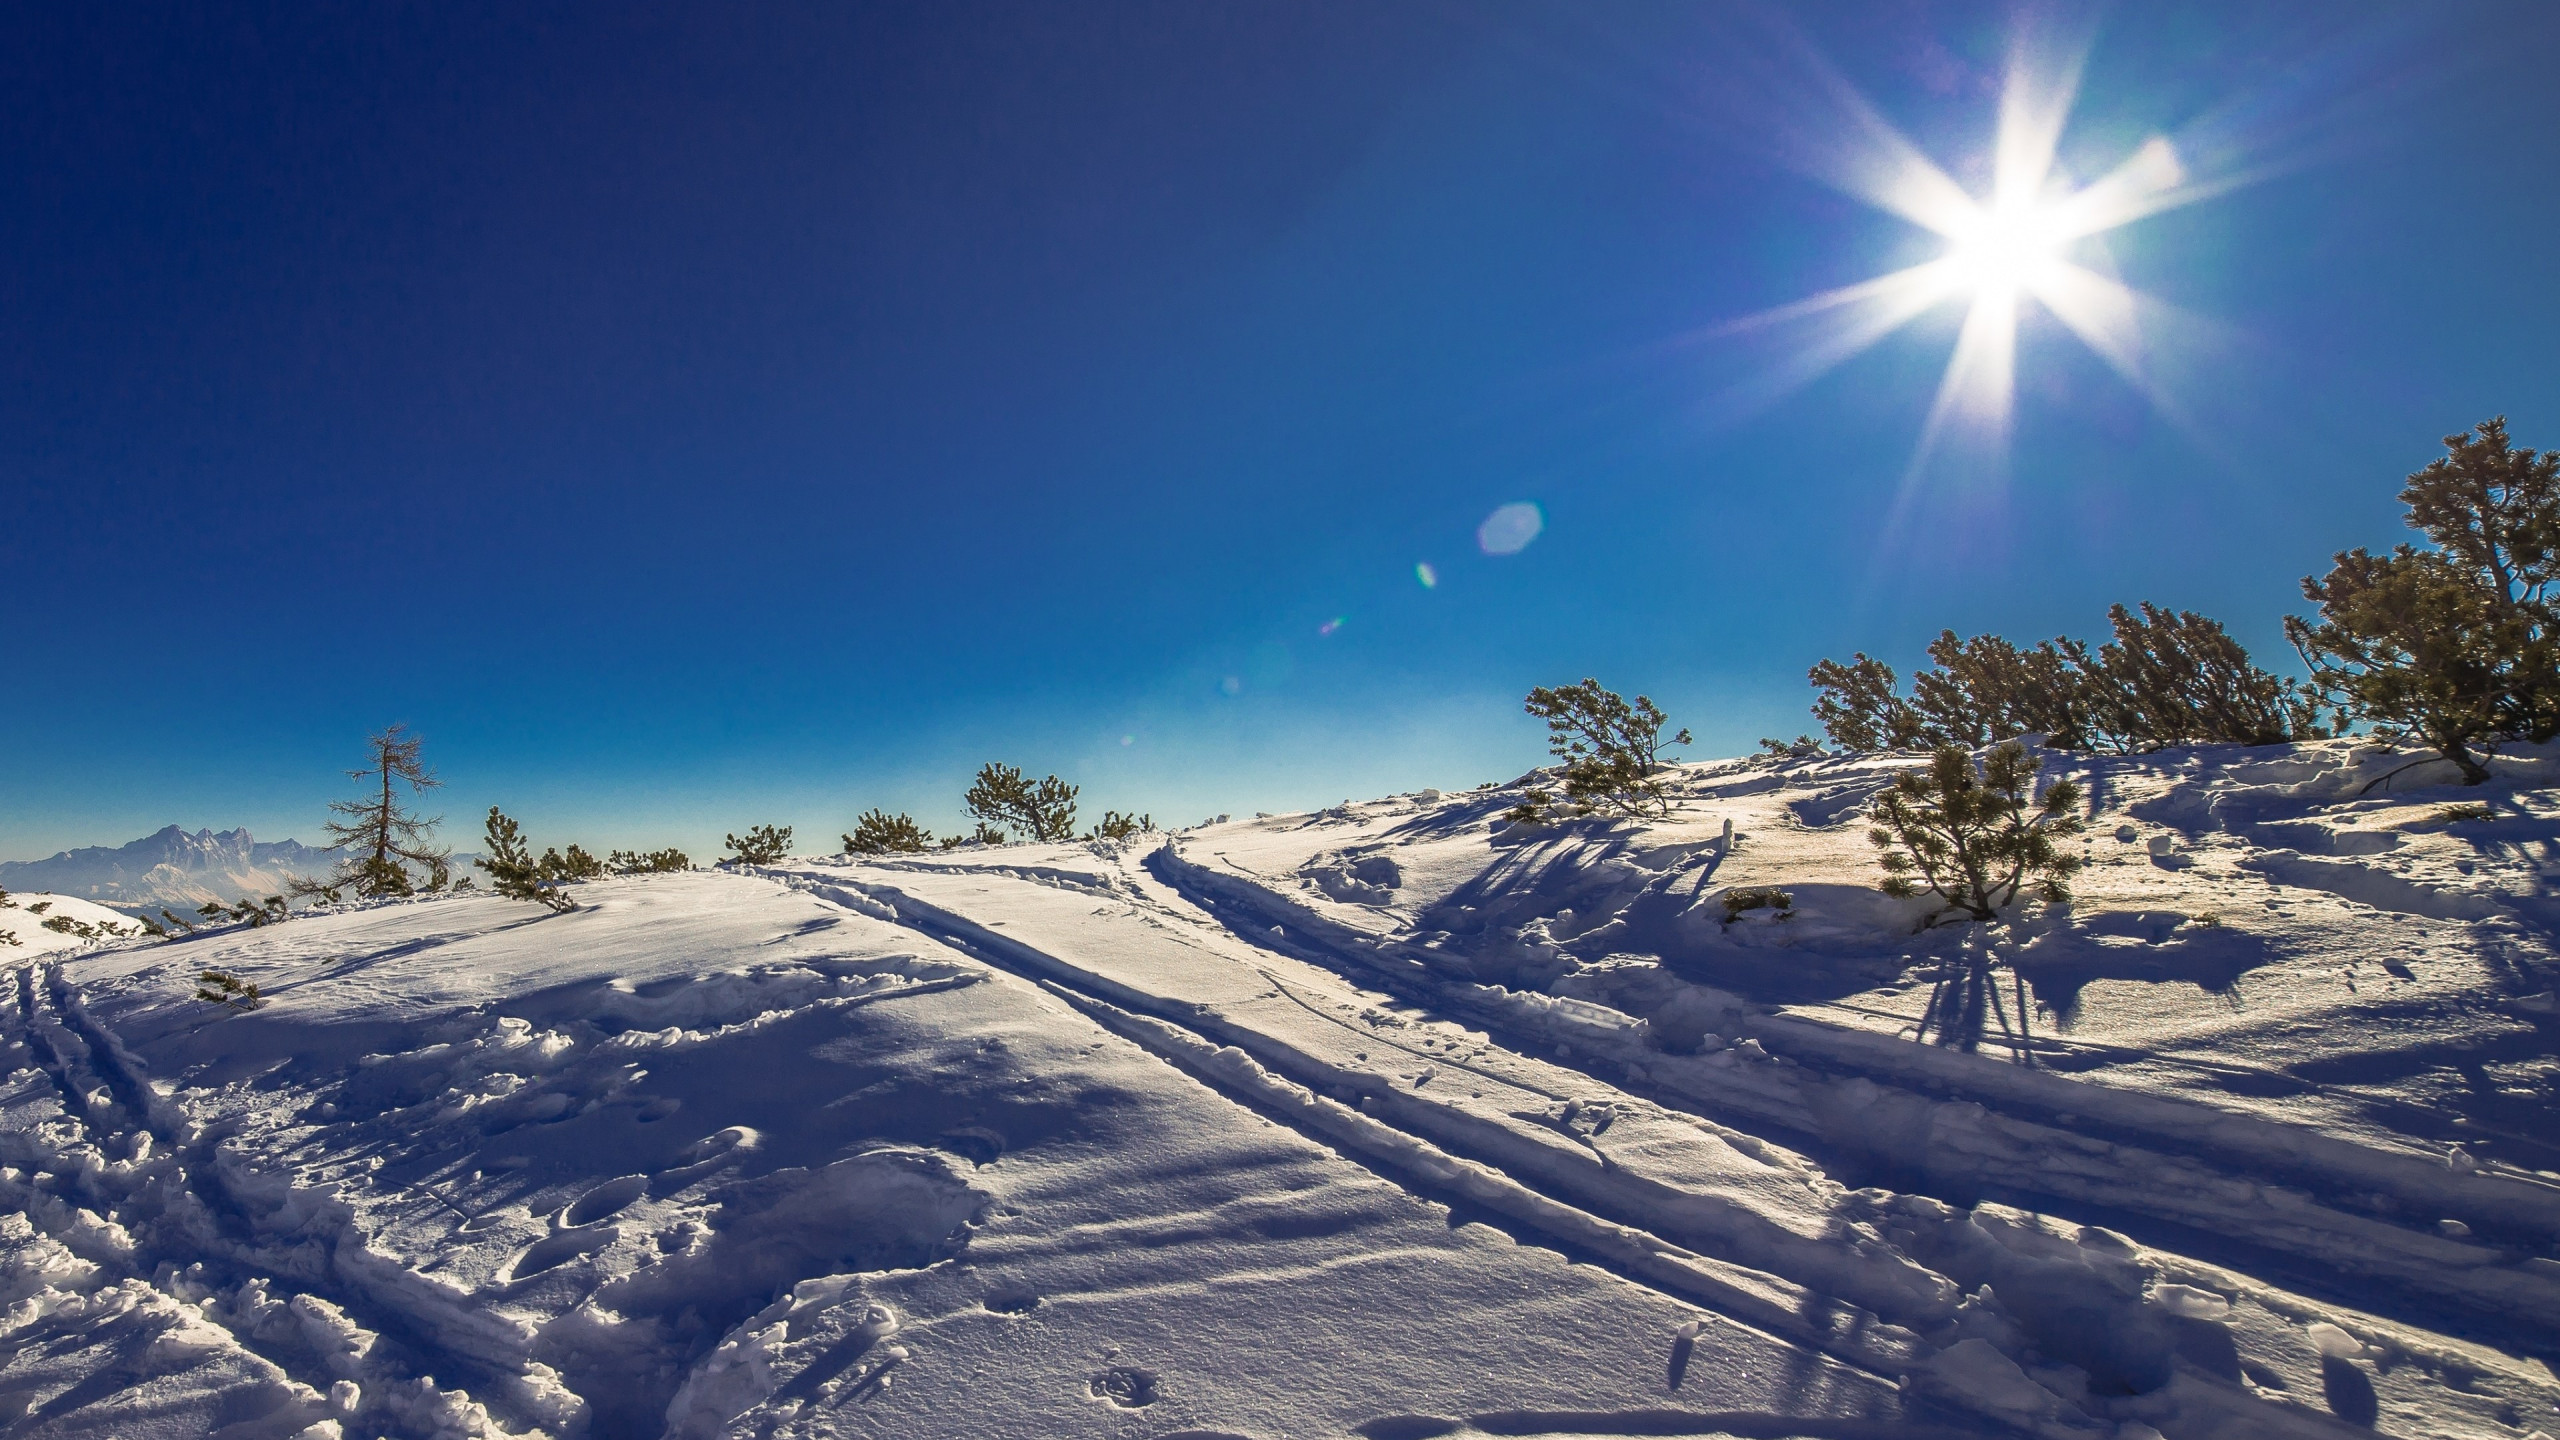 Sunny day in this Winter landscape wallpaper 2560x1440